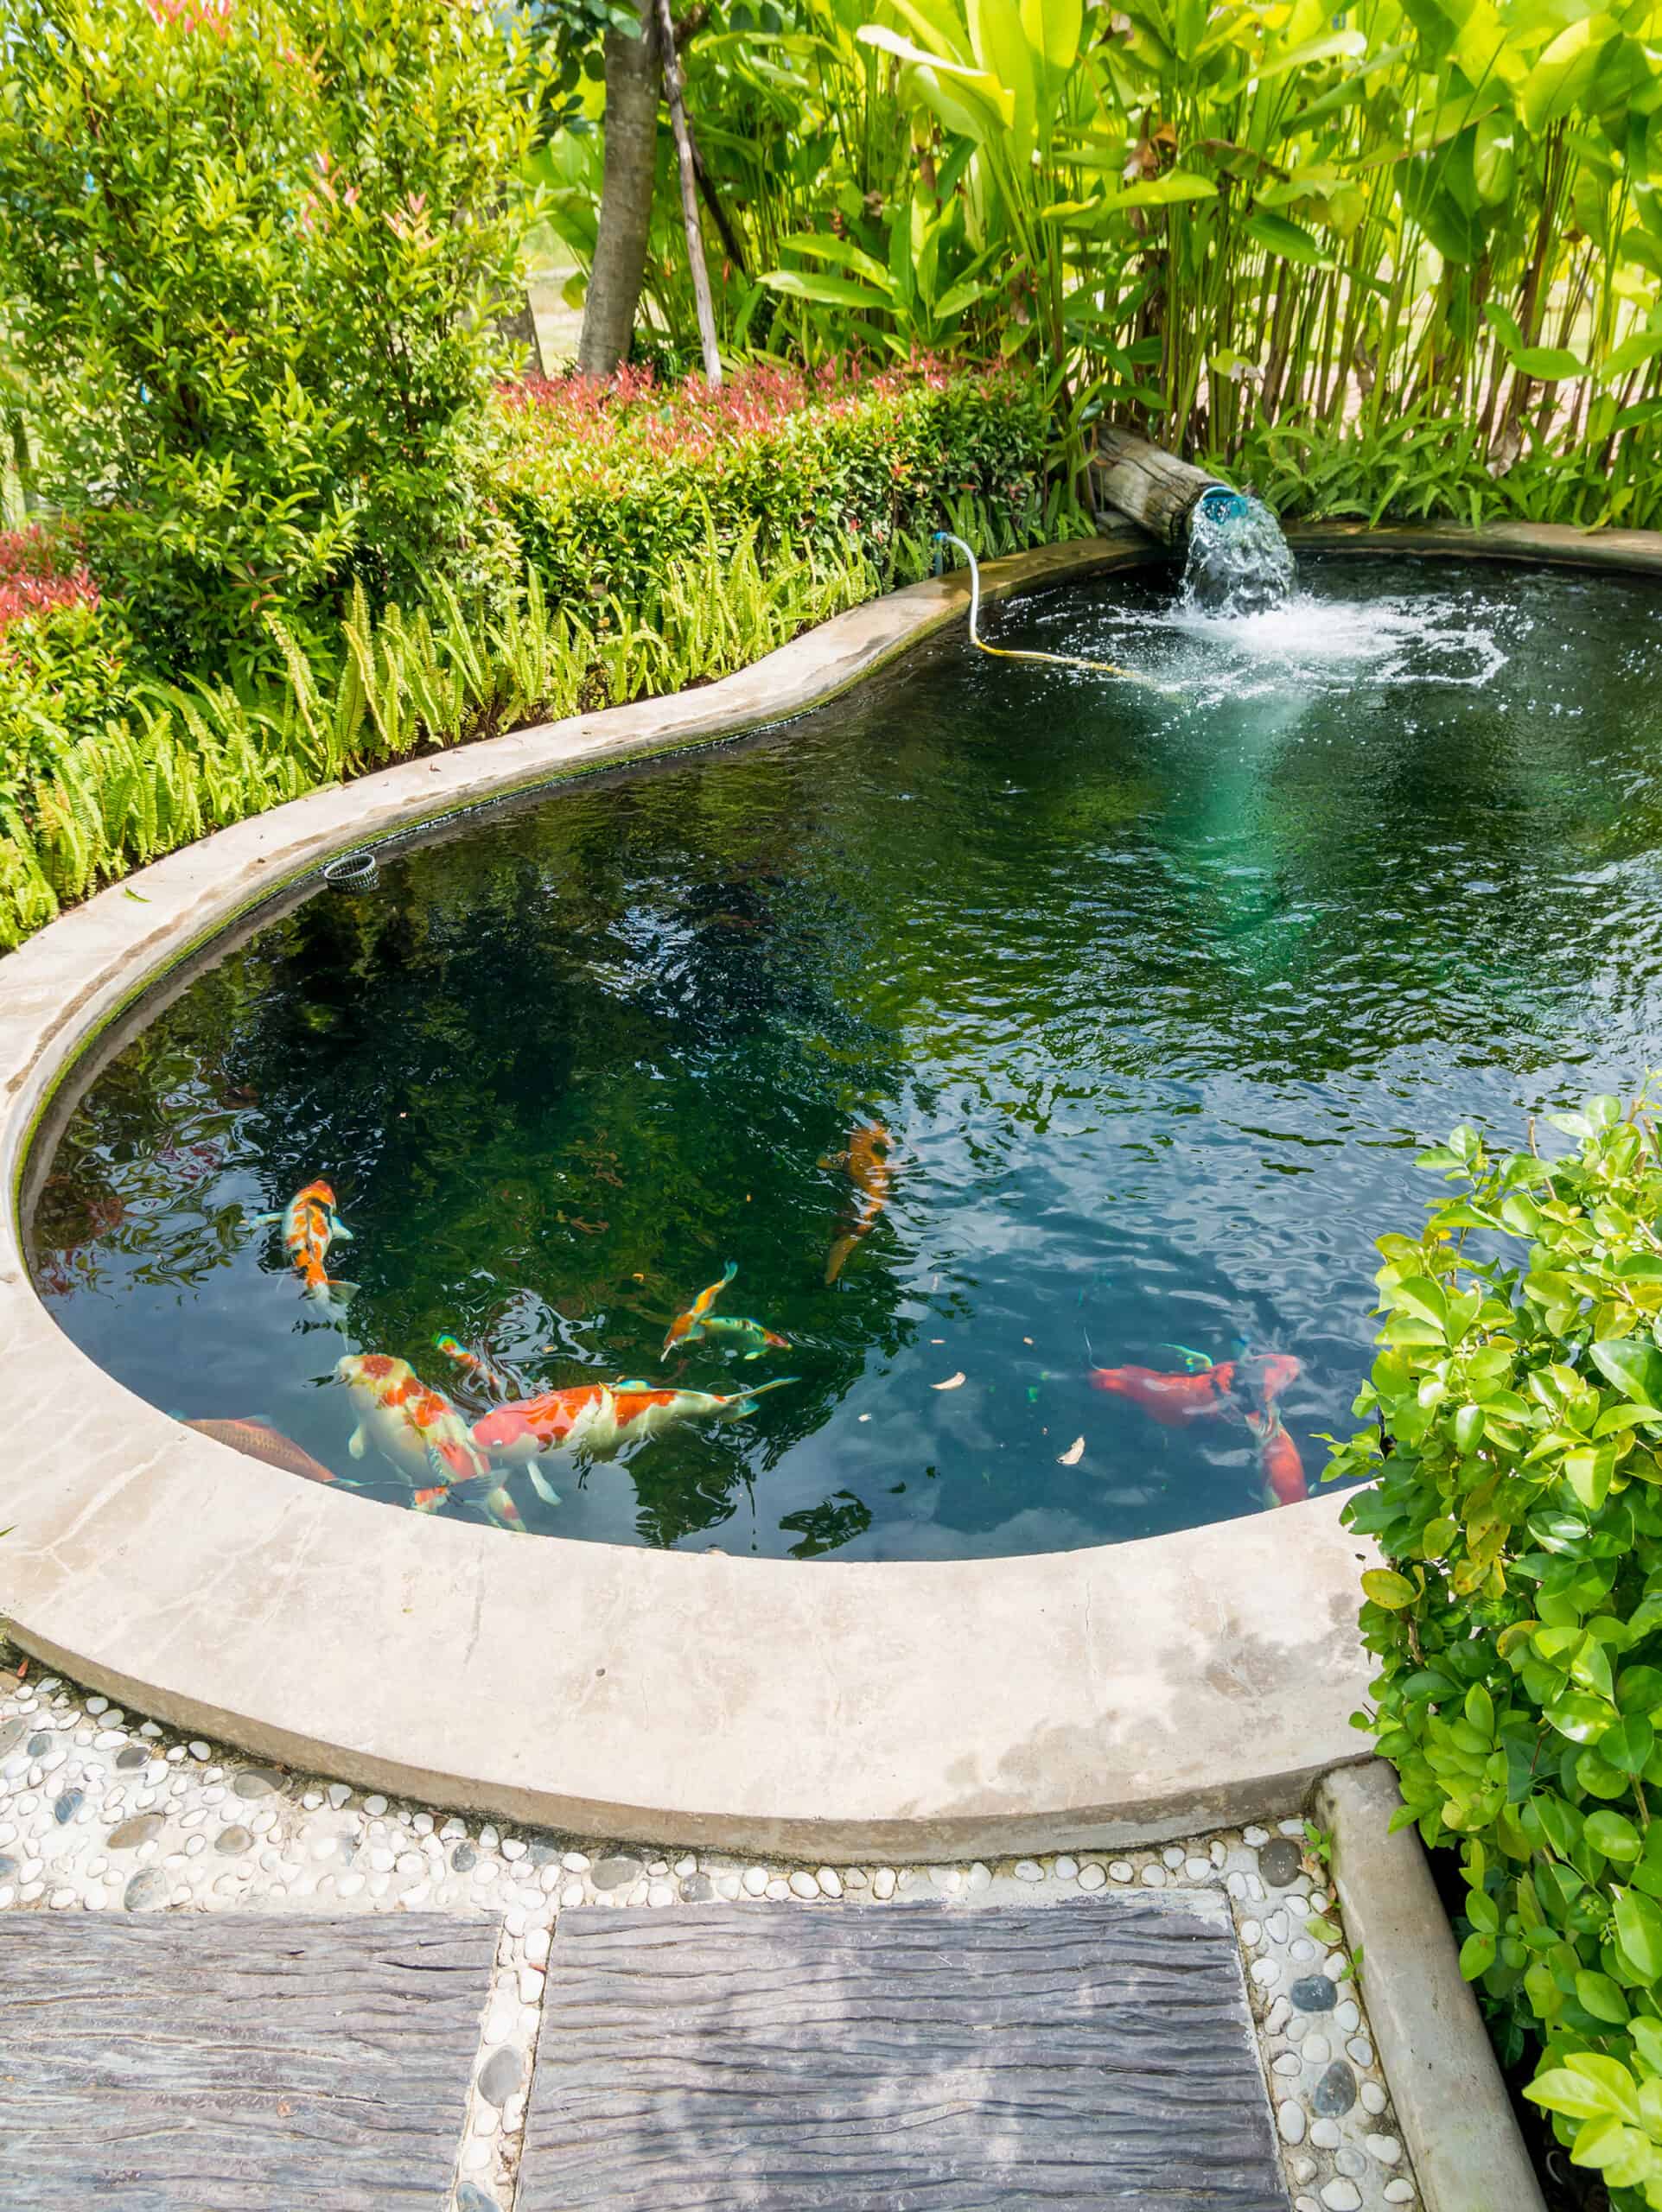 What Is The Best Location For A Koi Pond? - Pond Heaven